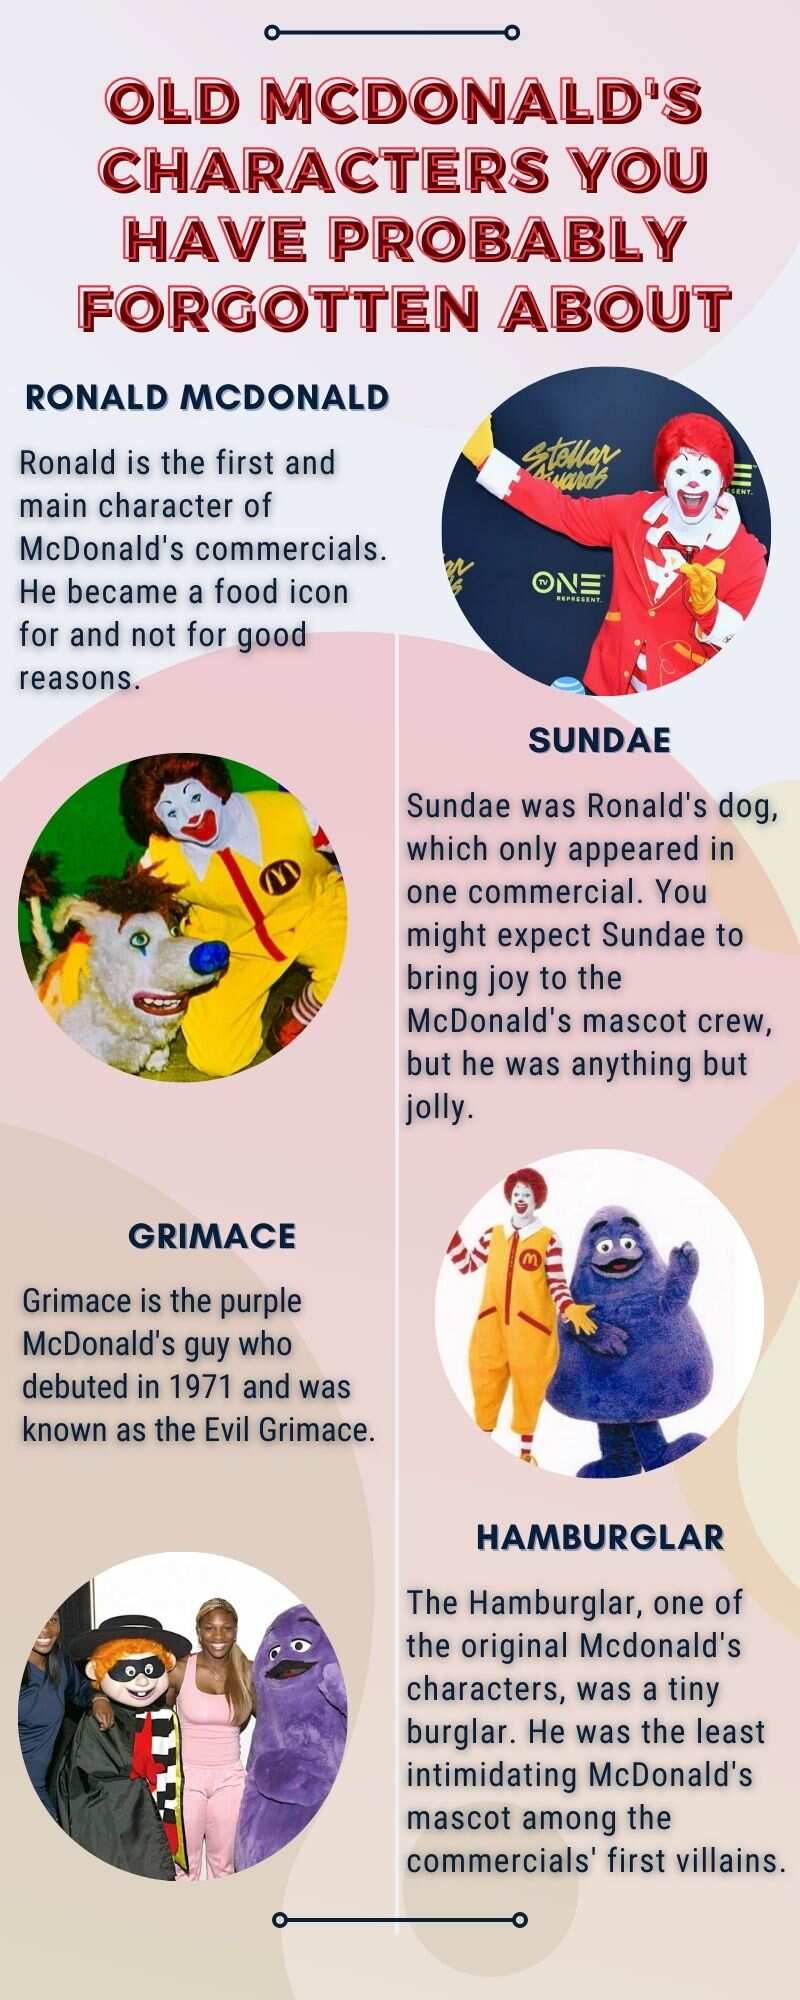 Old McDonald's characters you have probably forgotten about